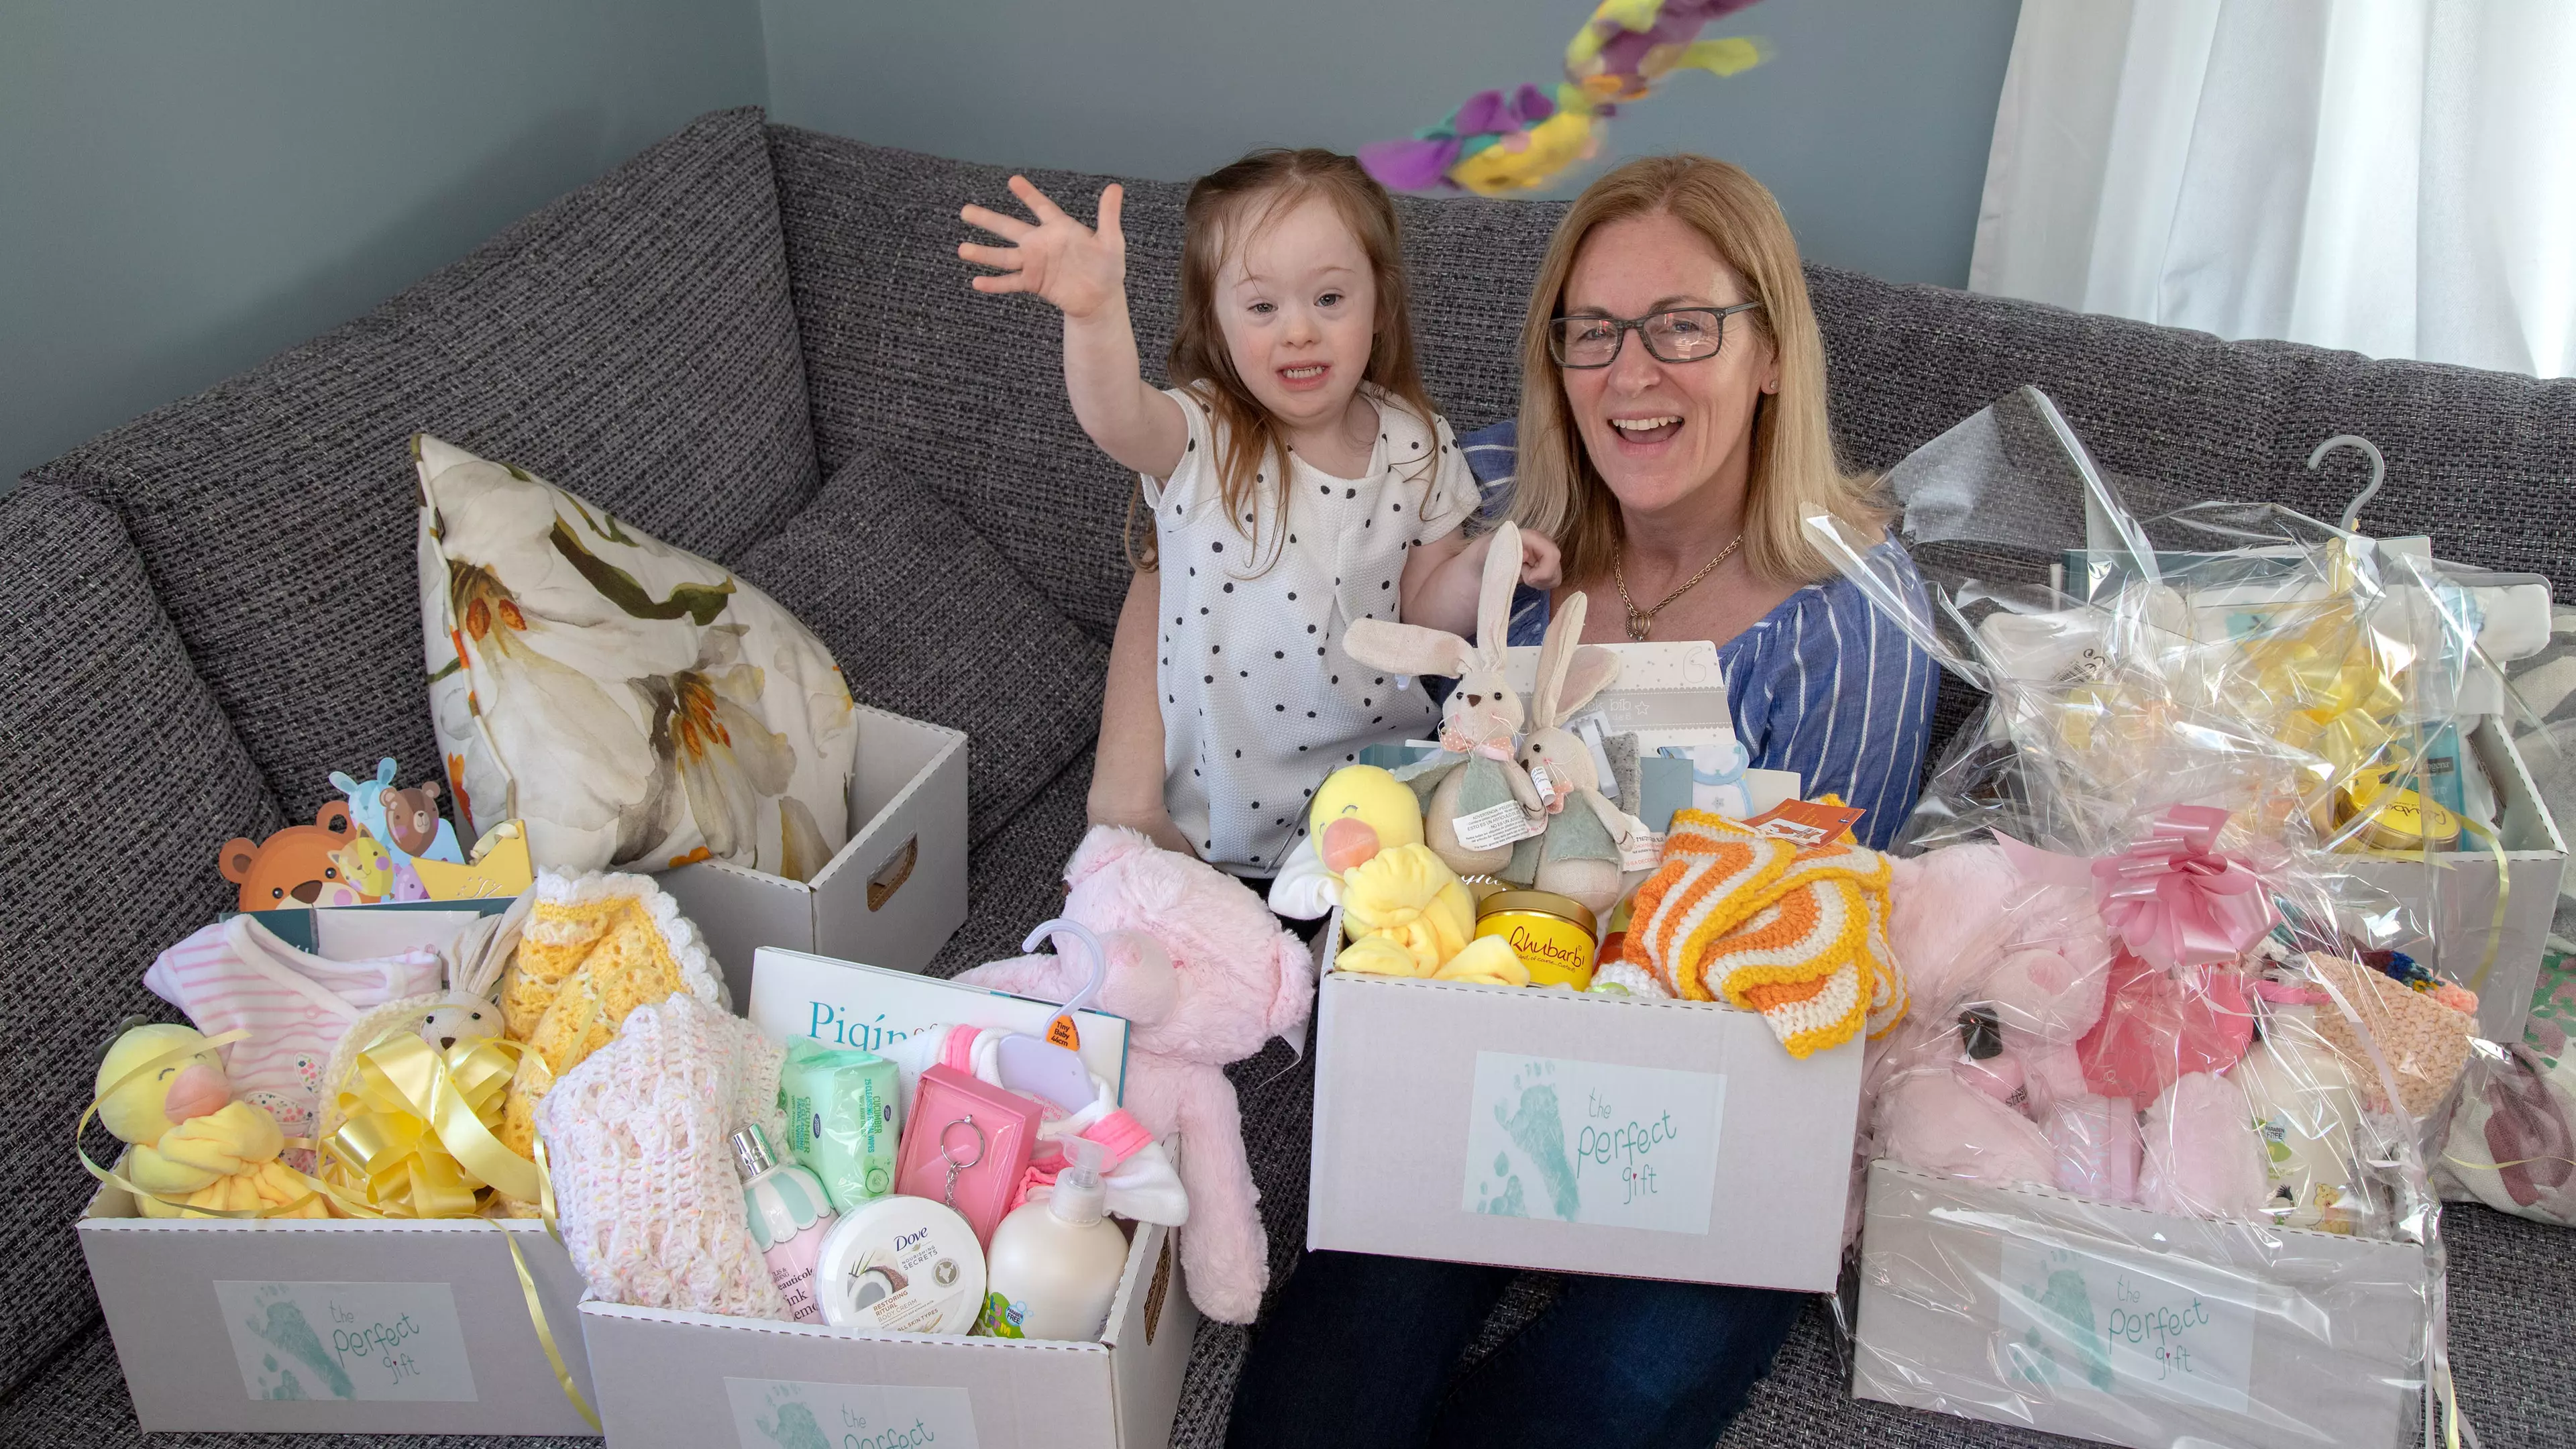 Mum Makes £85,000 Of Gifts For Mothers Of Babies With Down’s Syndrome